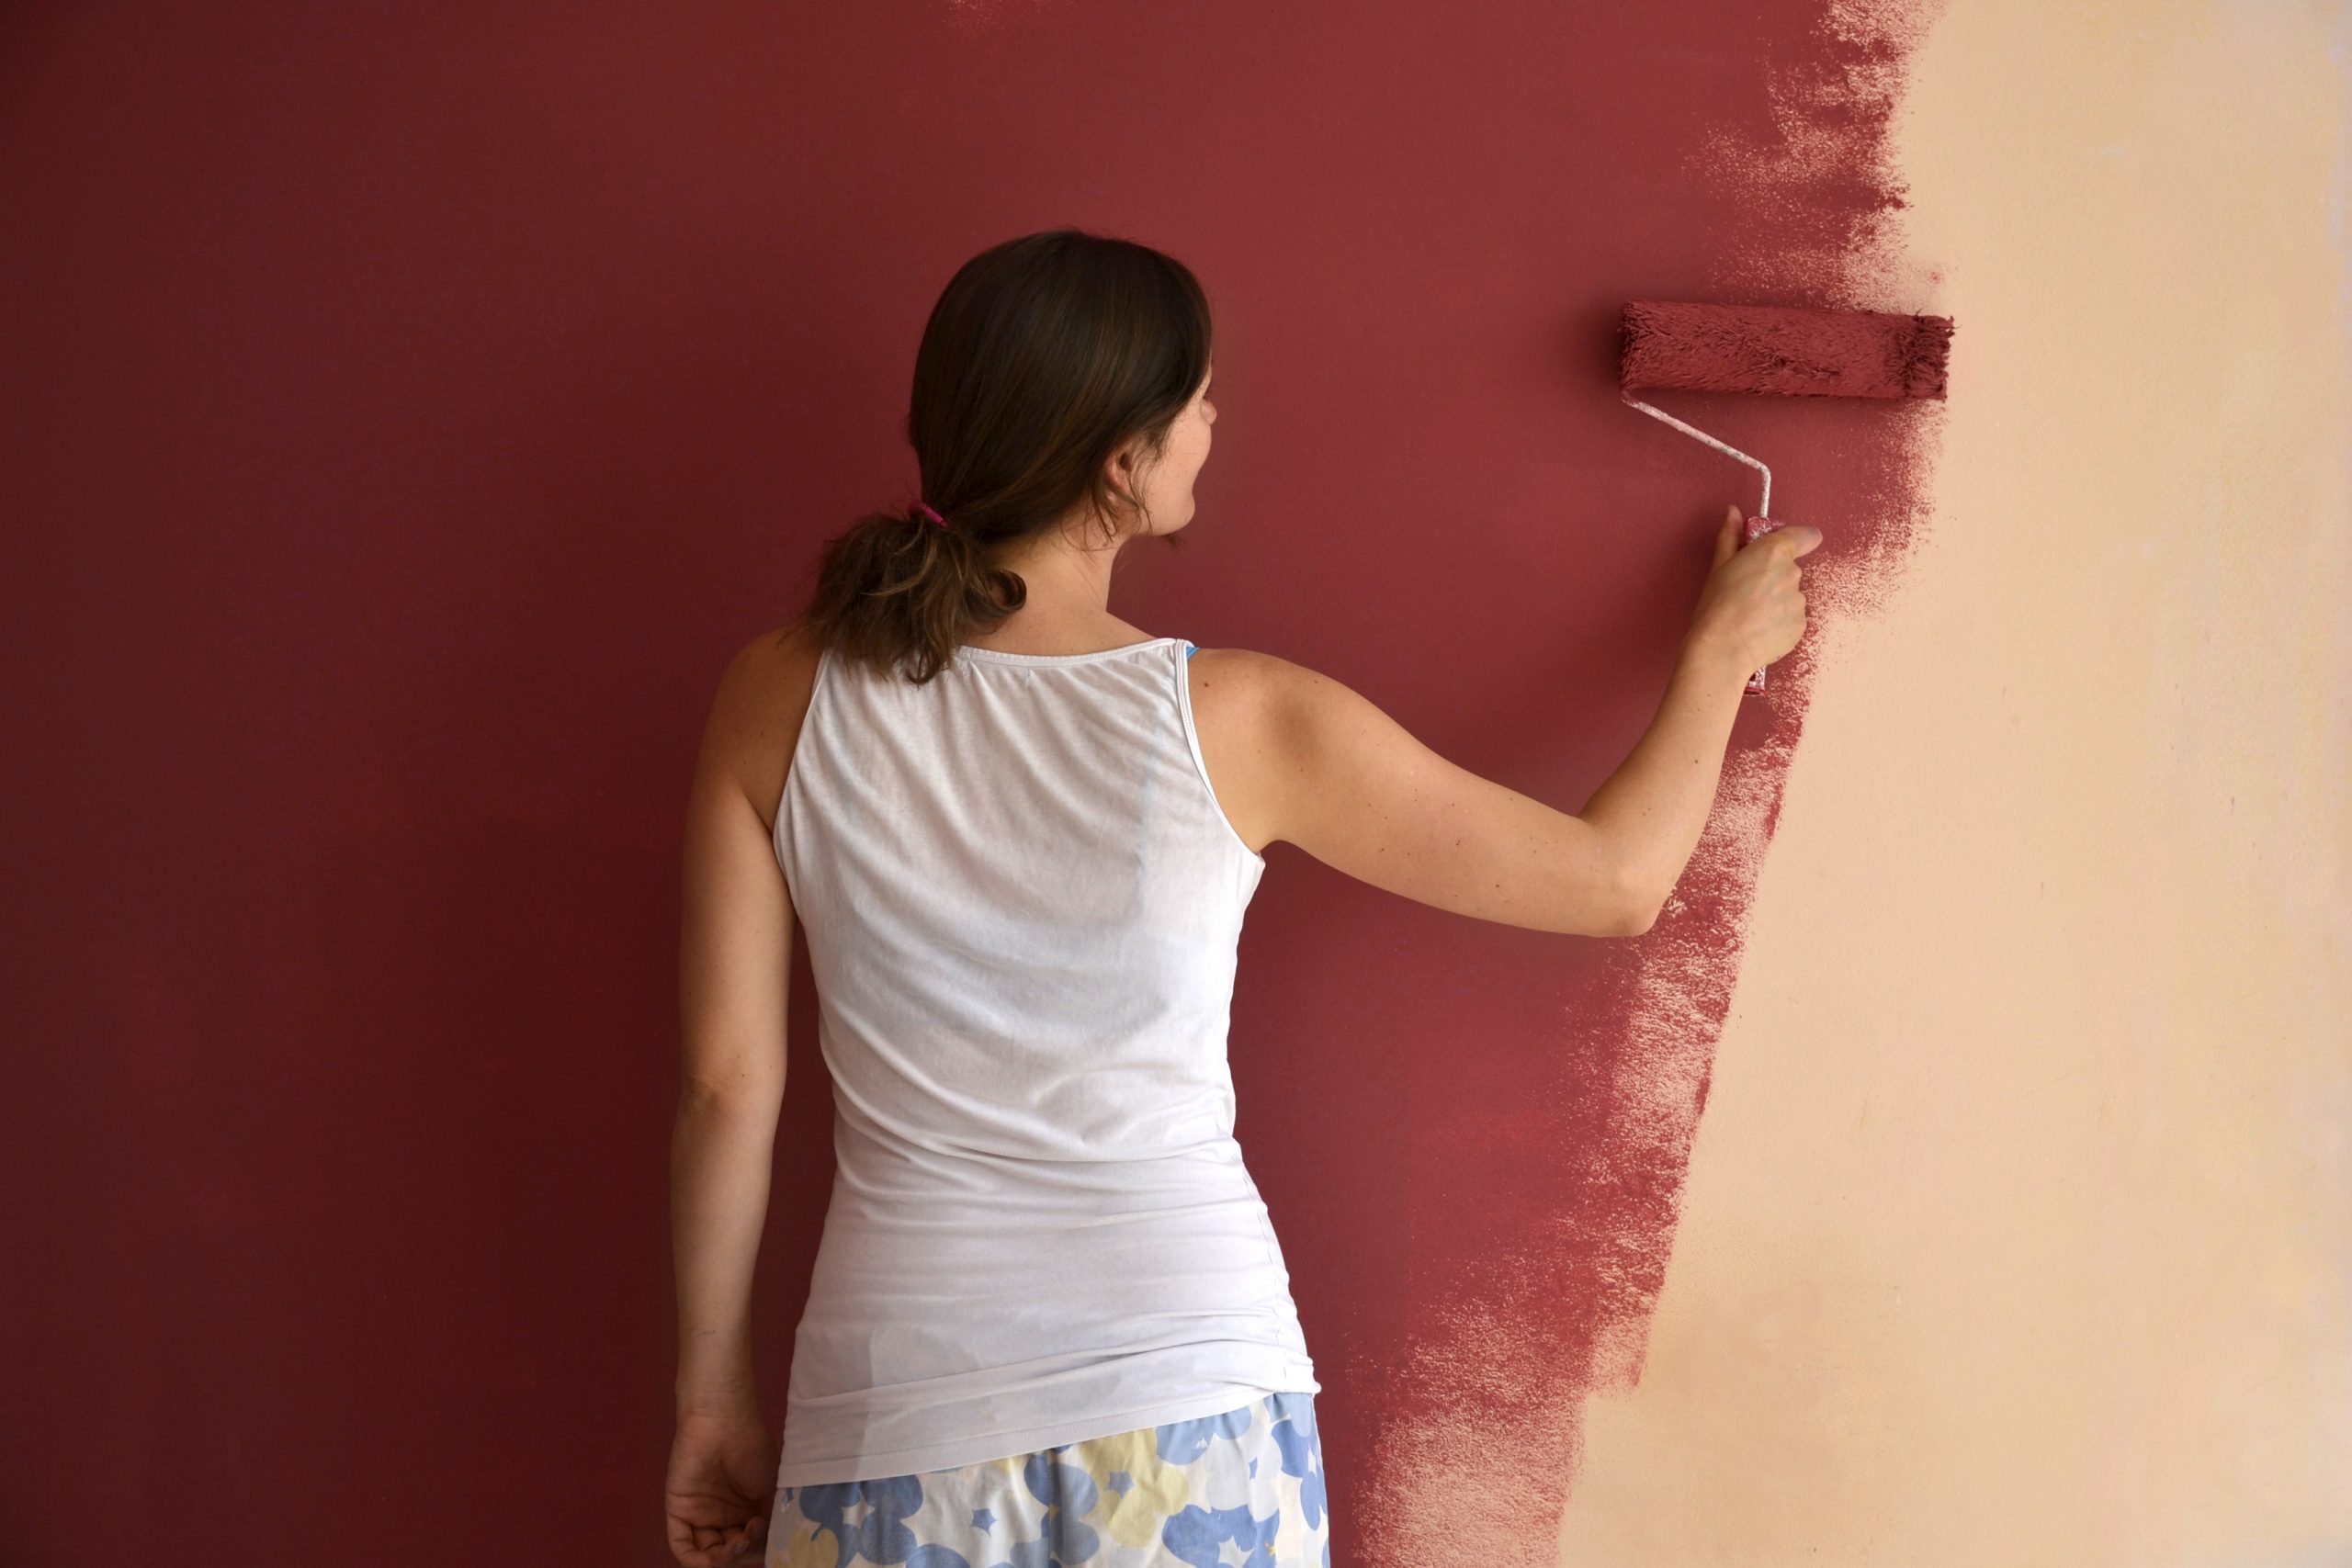 Painting Tips and Techniques to Help you DIY the Interior like a Pro Painter